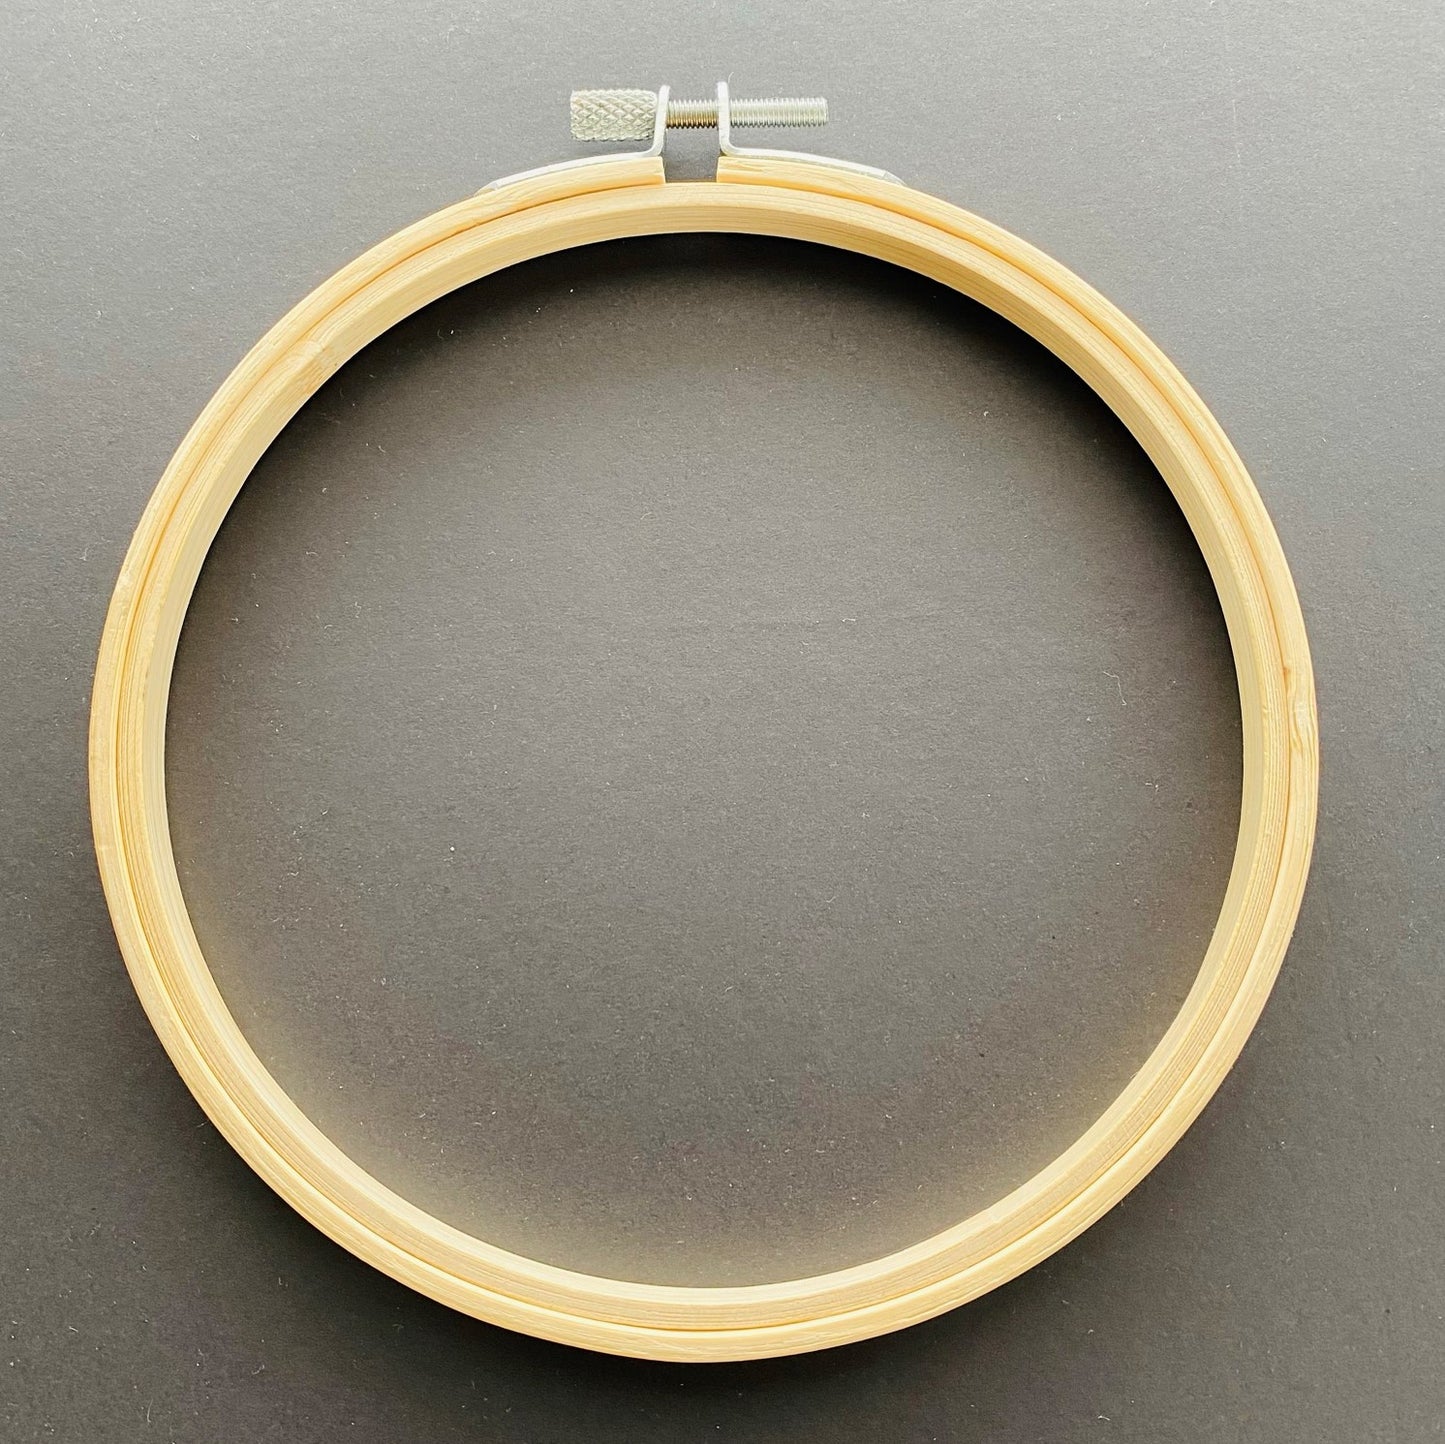 Bamboo Embroidery Hoop - 6" / 15cm